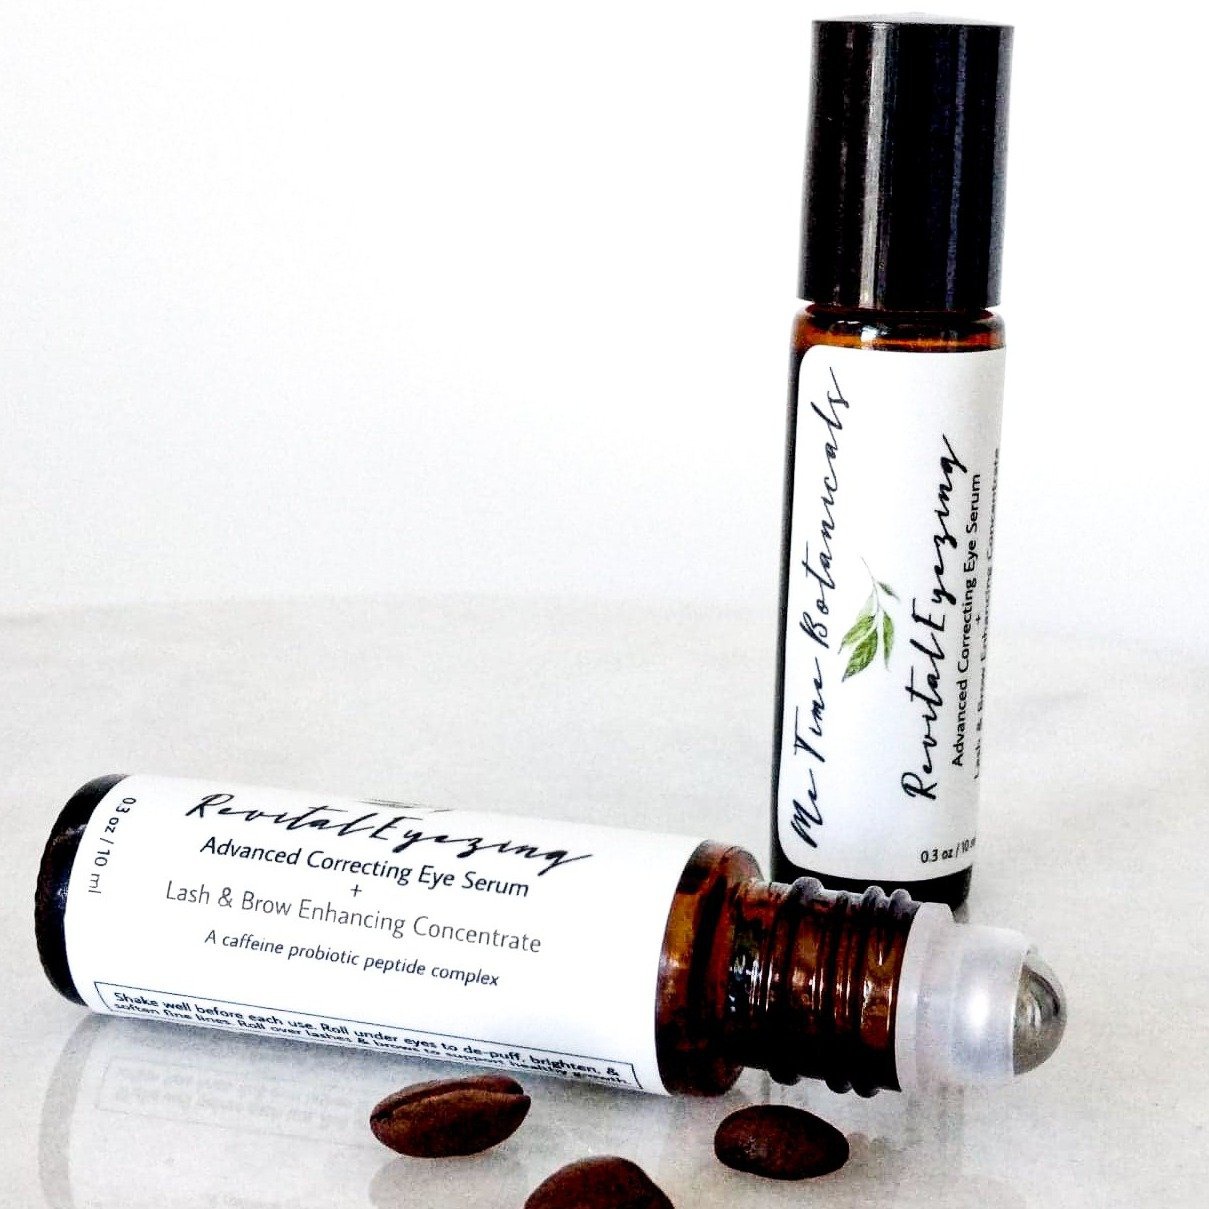 Me Time Botanicals Revitaleyezing Advanced Correcting Eye Serum + Lash And Brow Enhancing Concentrate